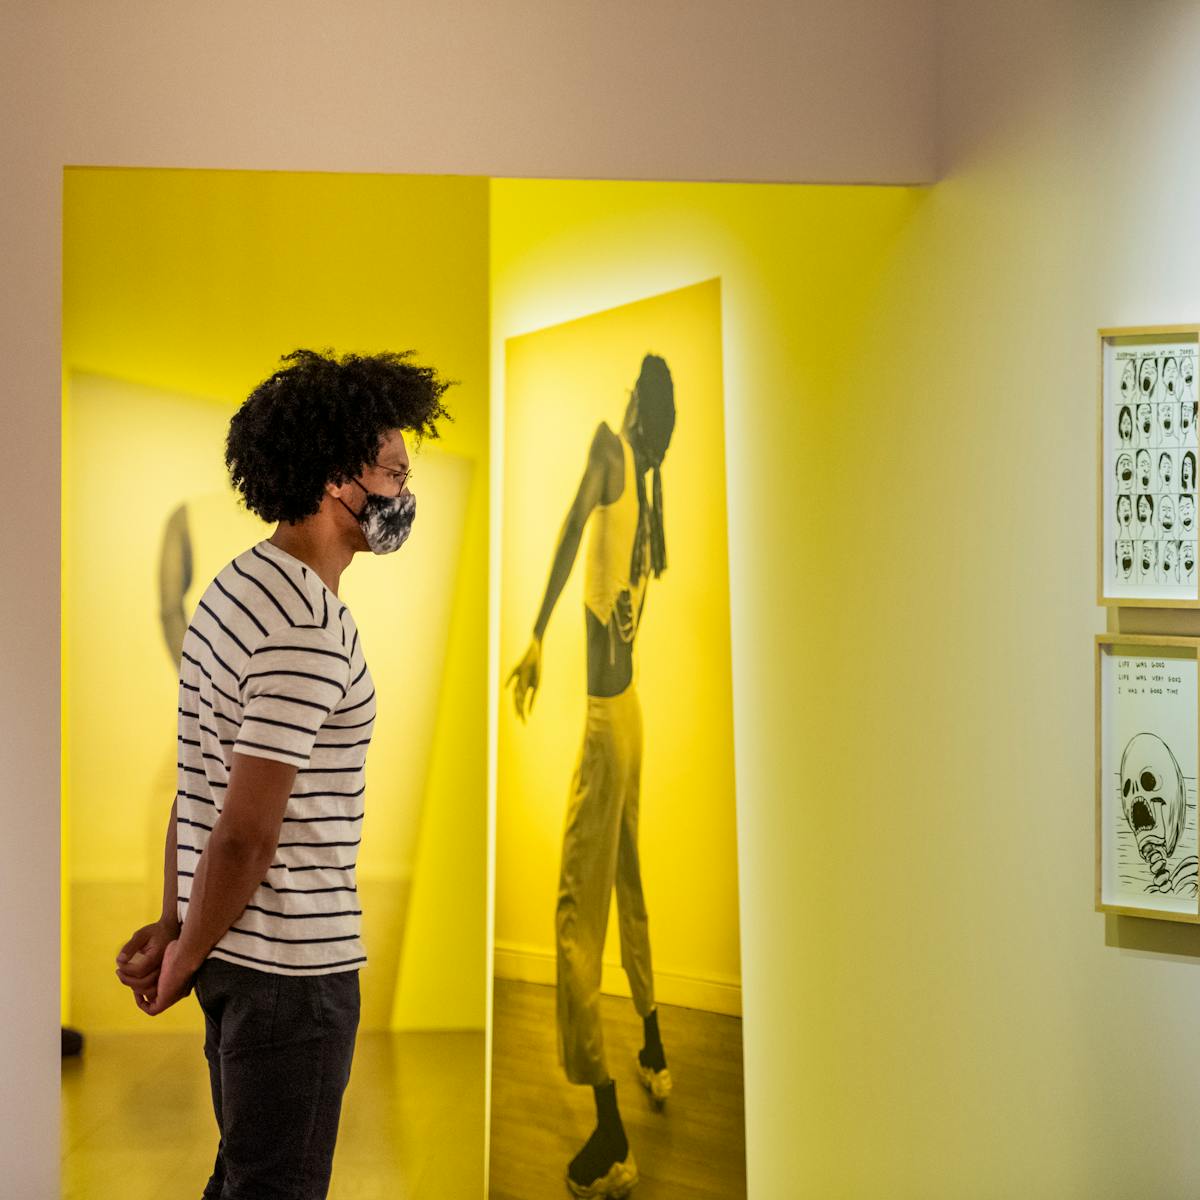 Photograph of a man wearing a face mask exploring an exhibition gallery space. He is wearing a white t-shirt with thin black horizontal stripes and jeans. His hands are clasped behind his back. The gallery around him has a warm yellow and pink tone. Directly in front of him is a large photographic print of a person in full length, frozen in a performative pose. Hung on the wall to the right is a cluster of 6 framed pen and ink drawings, 3 across by 2 high, showing in one a skull, in another a bird cage and in another a series of hands.